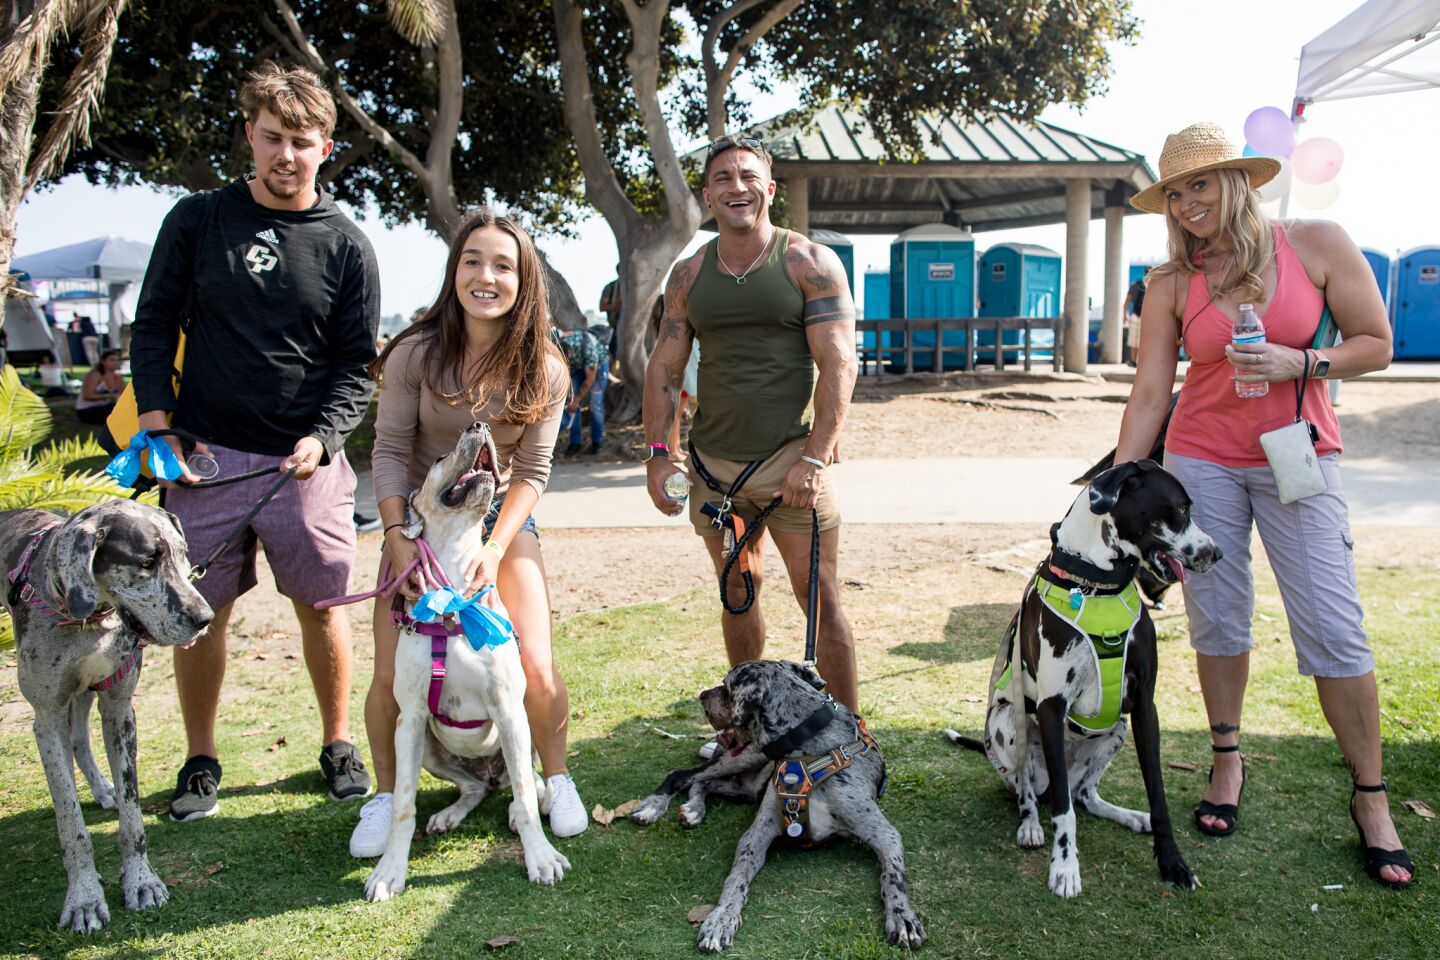 Four-legged friends were welcome at Barks & Brews at the Embarcadero Marina Park North on Saturday, Aug. 21, 2021.